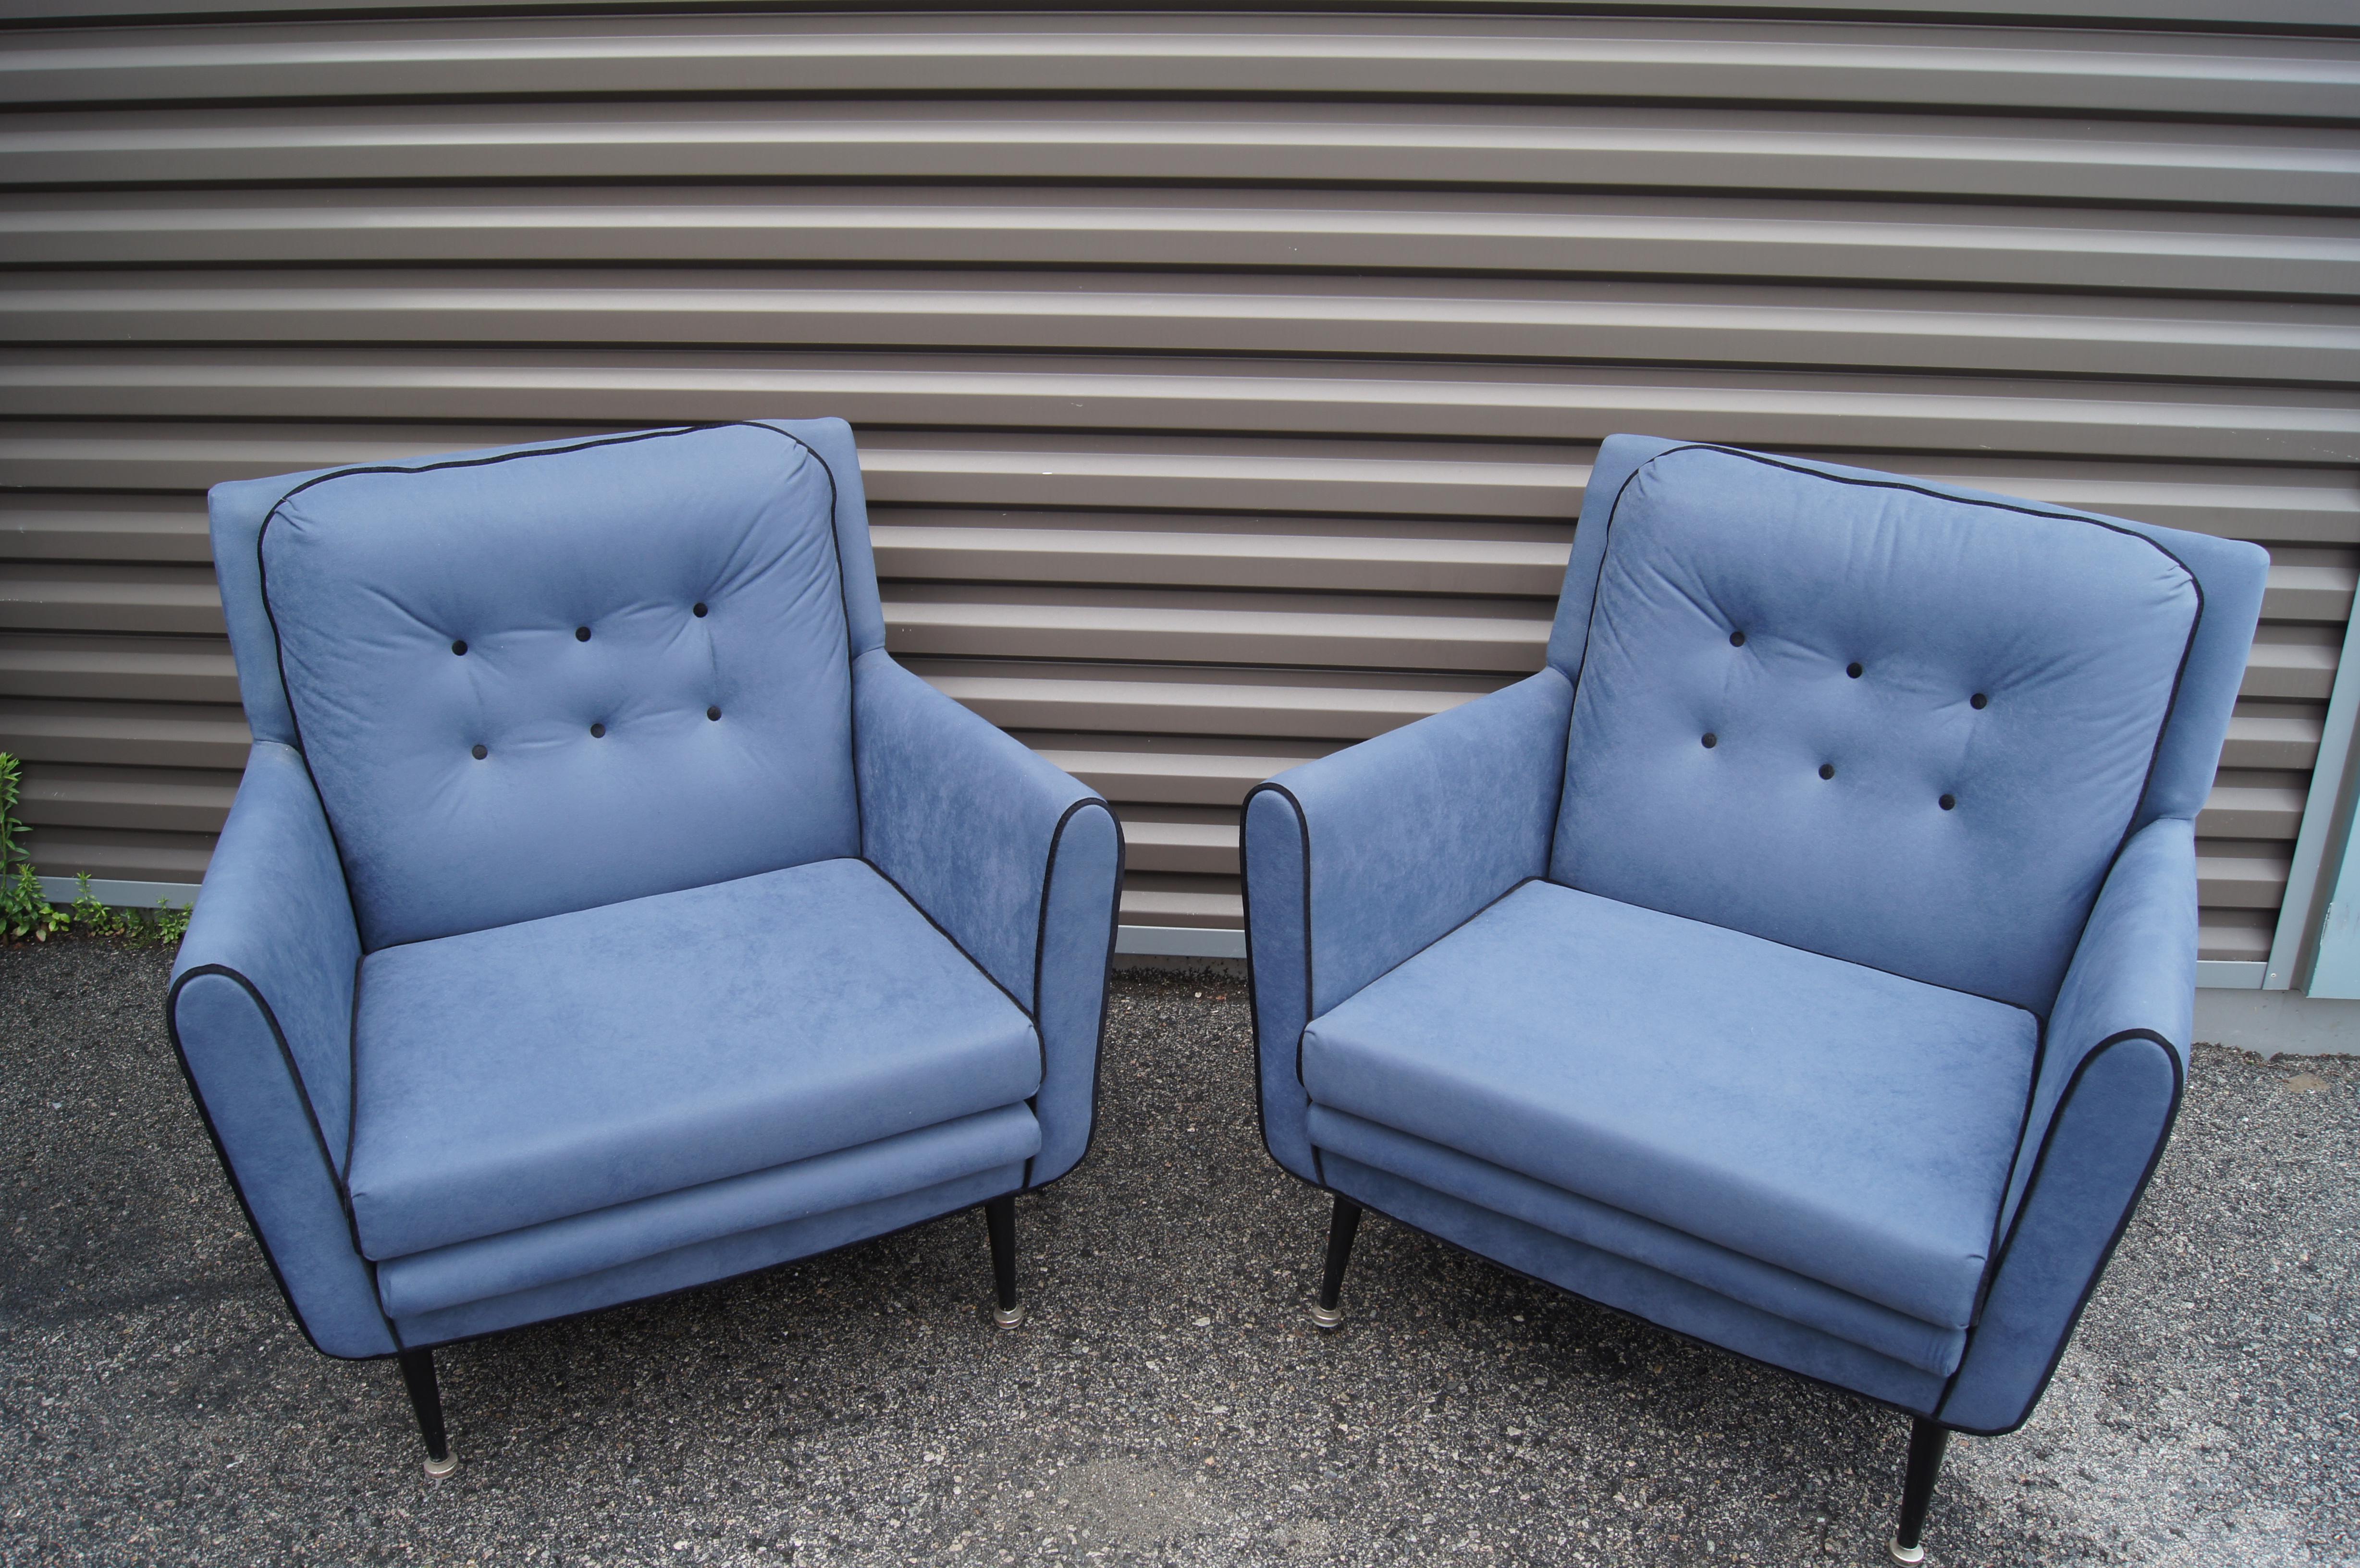 This pair of handsome lounge chairs features a distinctly American 1950s silhouette with tapered black metal legs and a tufted back cushion. The capacious frames have been reupholstered in a soft blue microfiber with contrasting black piping.